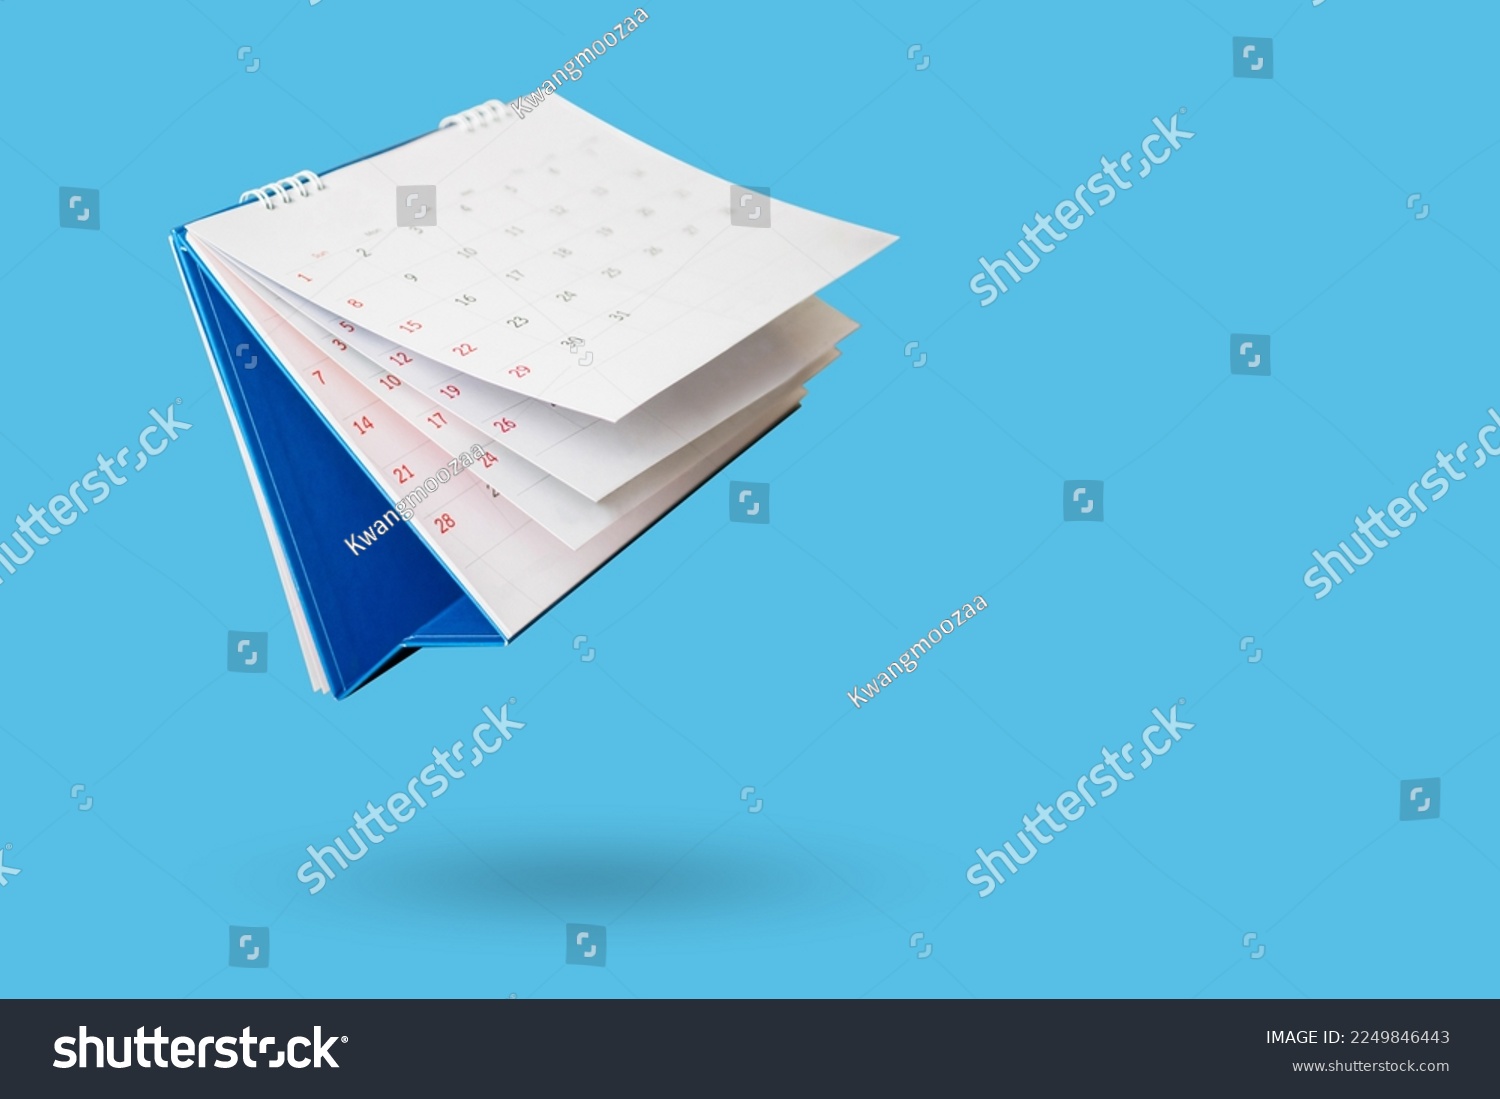 White paper desk calendar flipping page isolated on blue background #2249846443